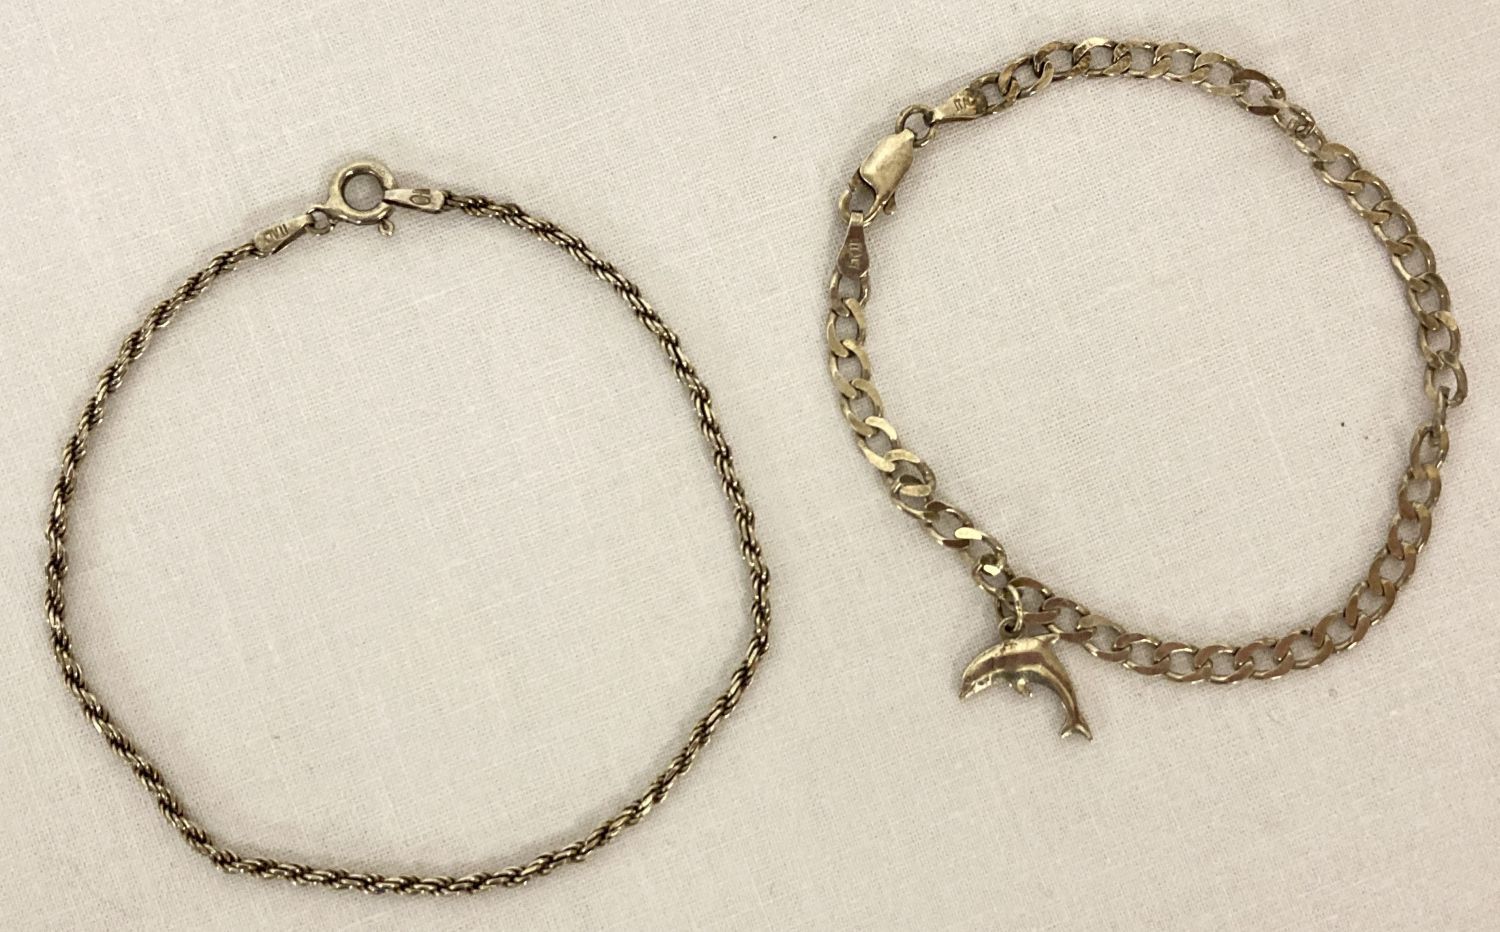 2 silver bracelets. A rope chain bracelet with spring clasp.